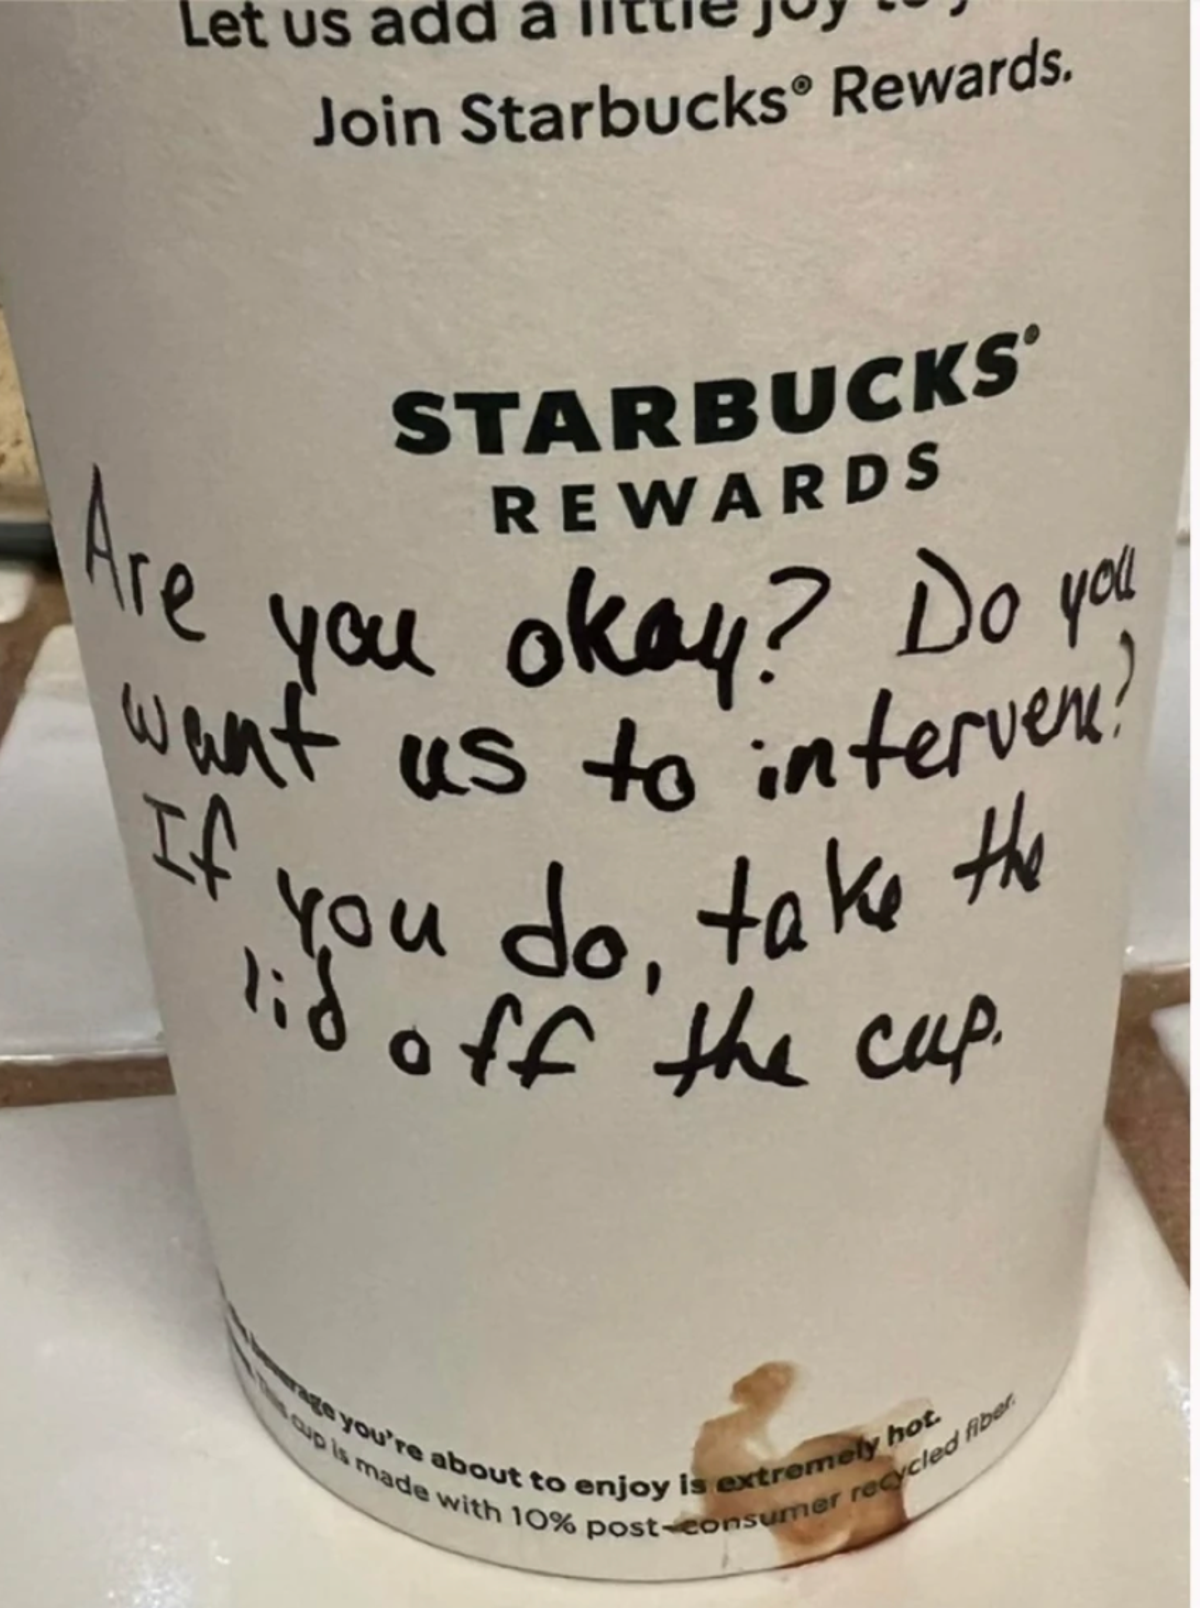 Starbucks barista comes to teenager’s aid by scrawling message on coffee cup